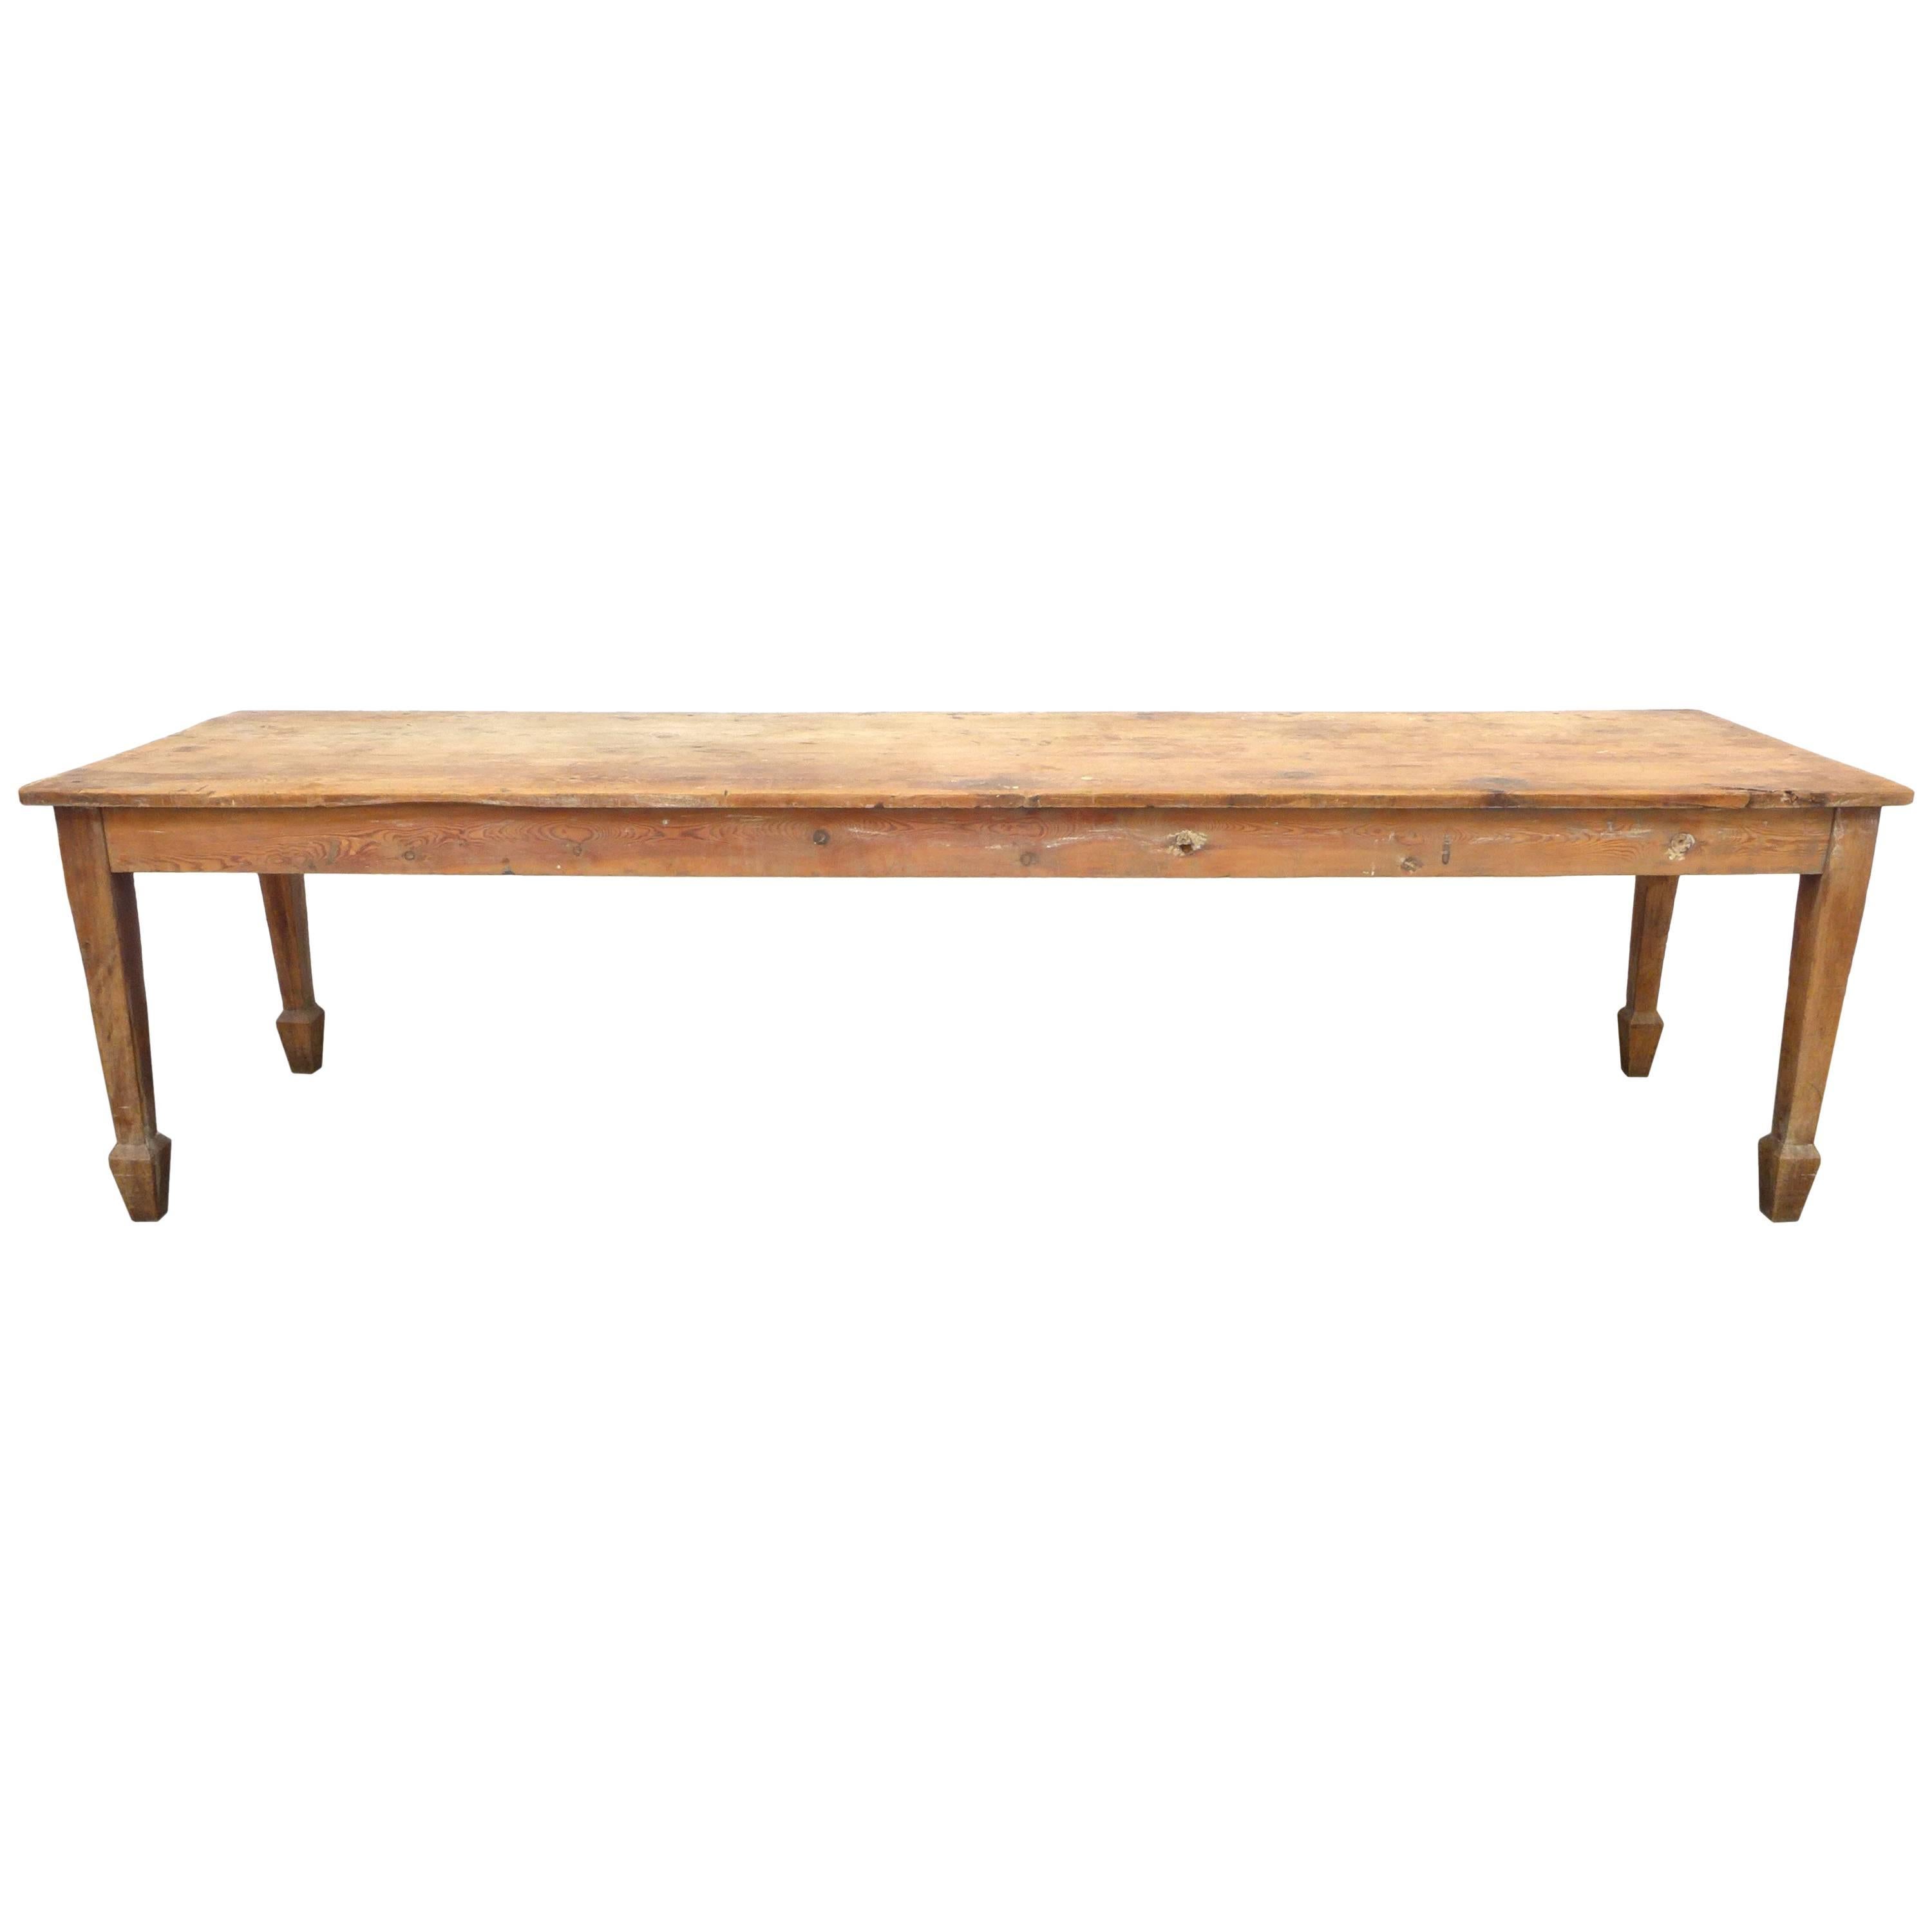 Exceptional 19th Century English Farm Dining Table For Sale